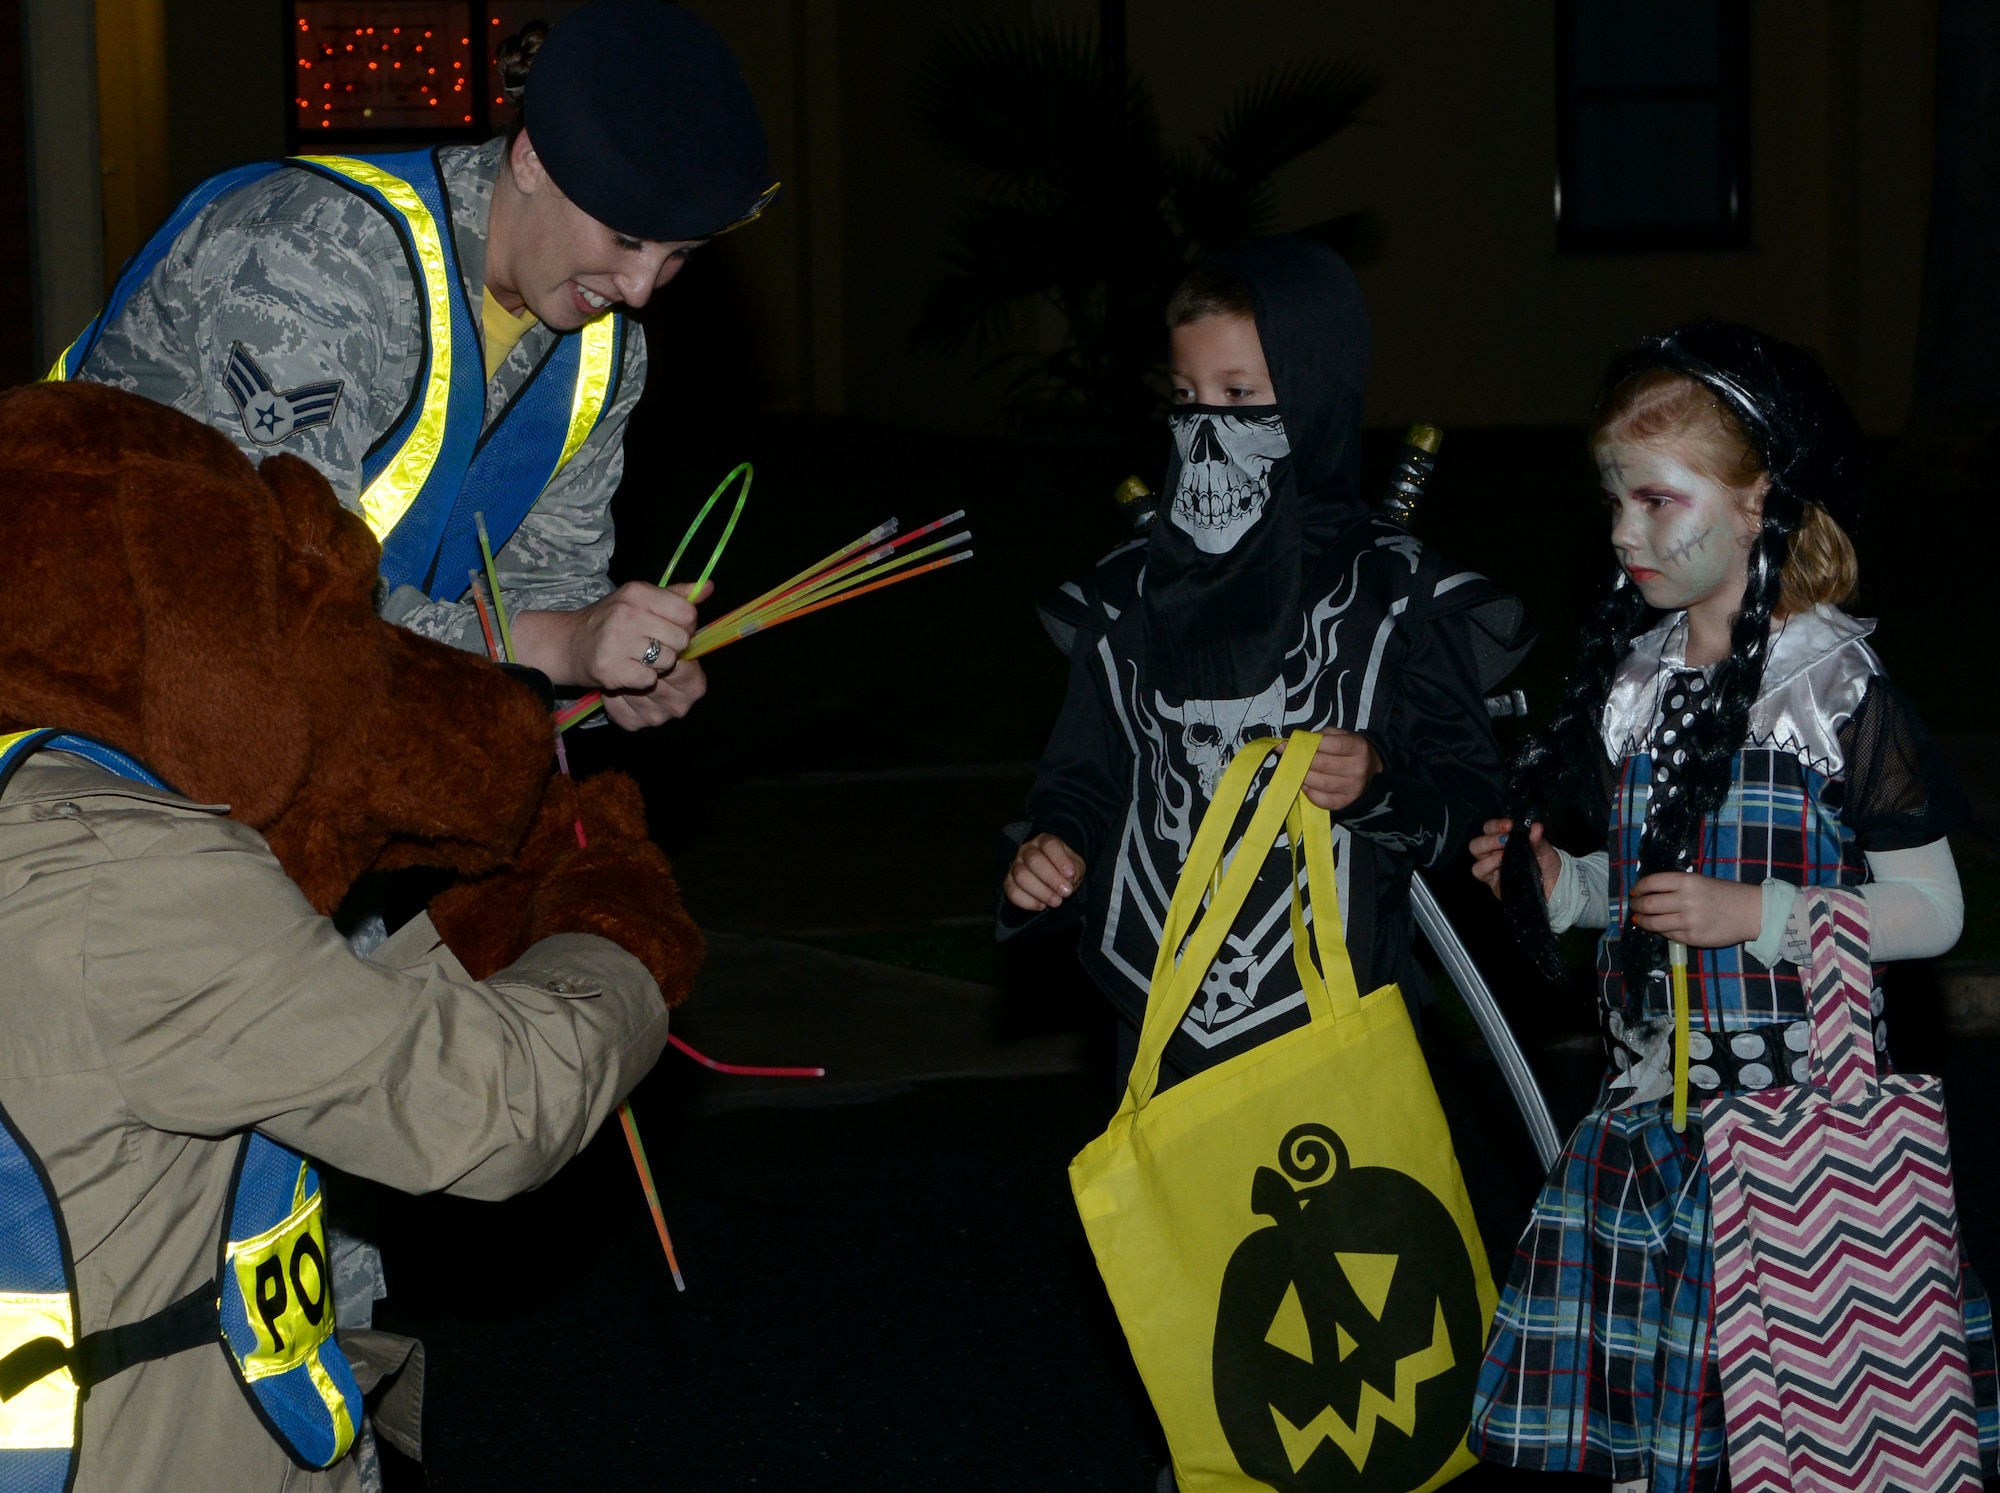 Members of the 39th Security Forces Squadron, along with McGruff the Crime Dog, pass out glow sticks and candy during Pumpkin Patrol Oct. 31, 2014, at Incirlik Air Base, Turkey. Pumpkin Patrol is an event hosted by the 39th SFS, where defenders patrol through base housing and gave out candy and glow sticks on Halloween night. (U.S. Air Force photo by Staff Sgt. Caleb Pierce/Released)